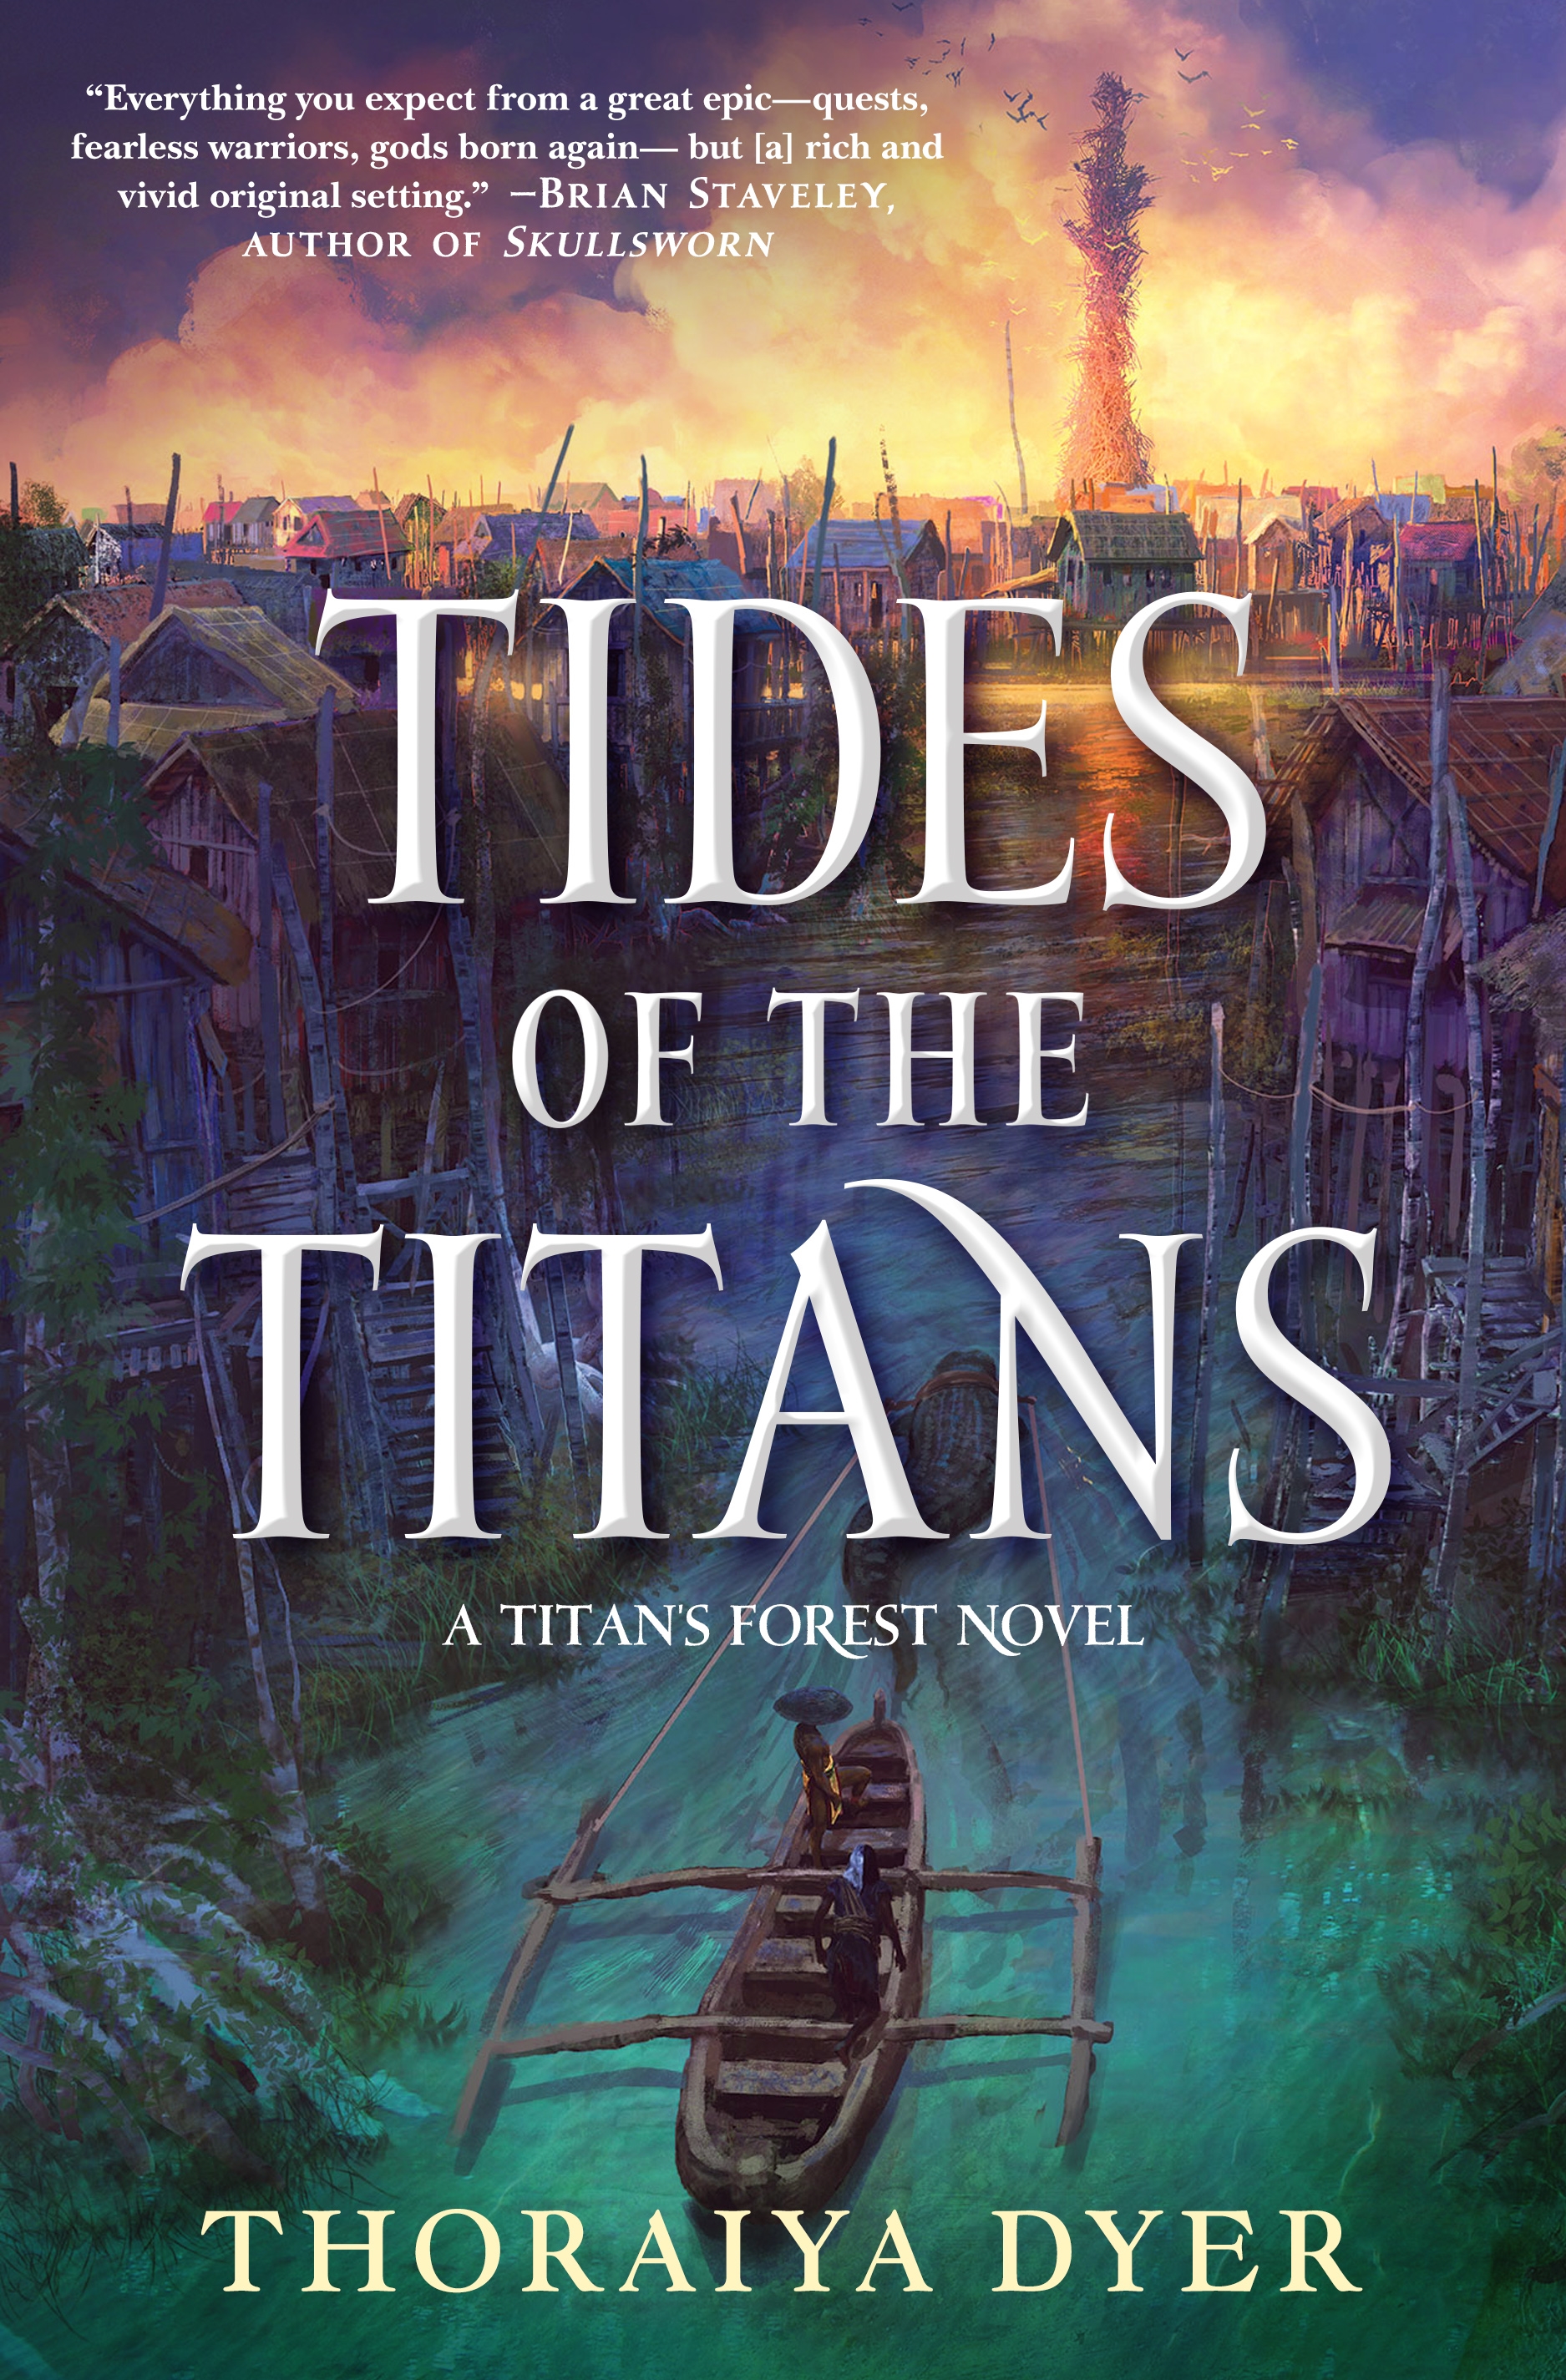 Tides of the Titans : A Titan's Forest Novel by Thoraiya Dyer